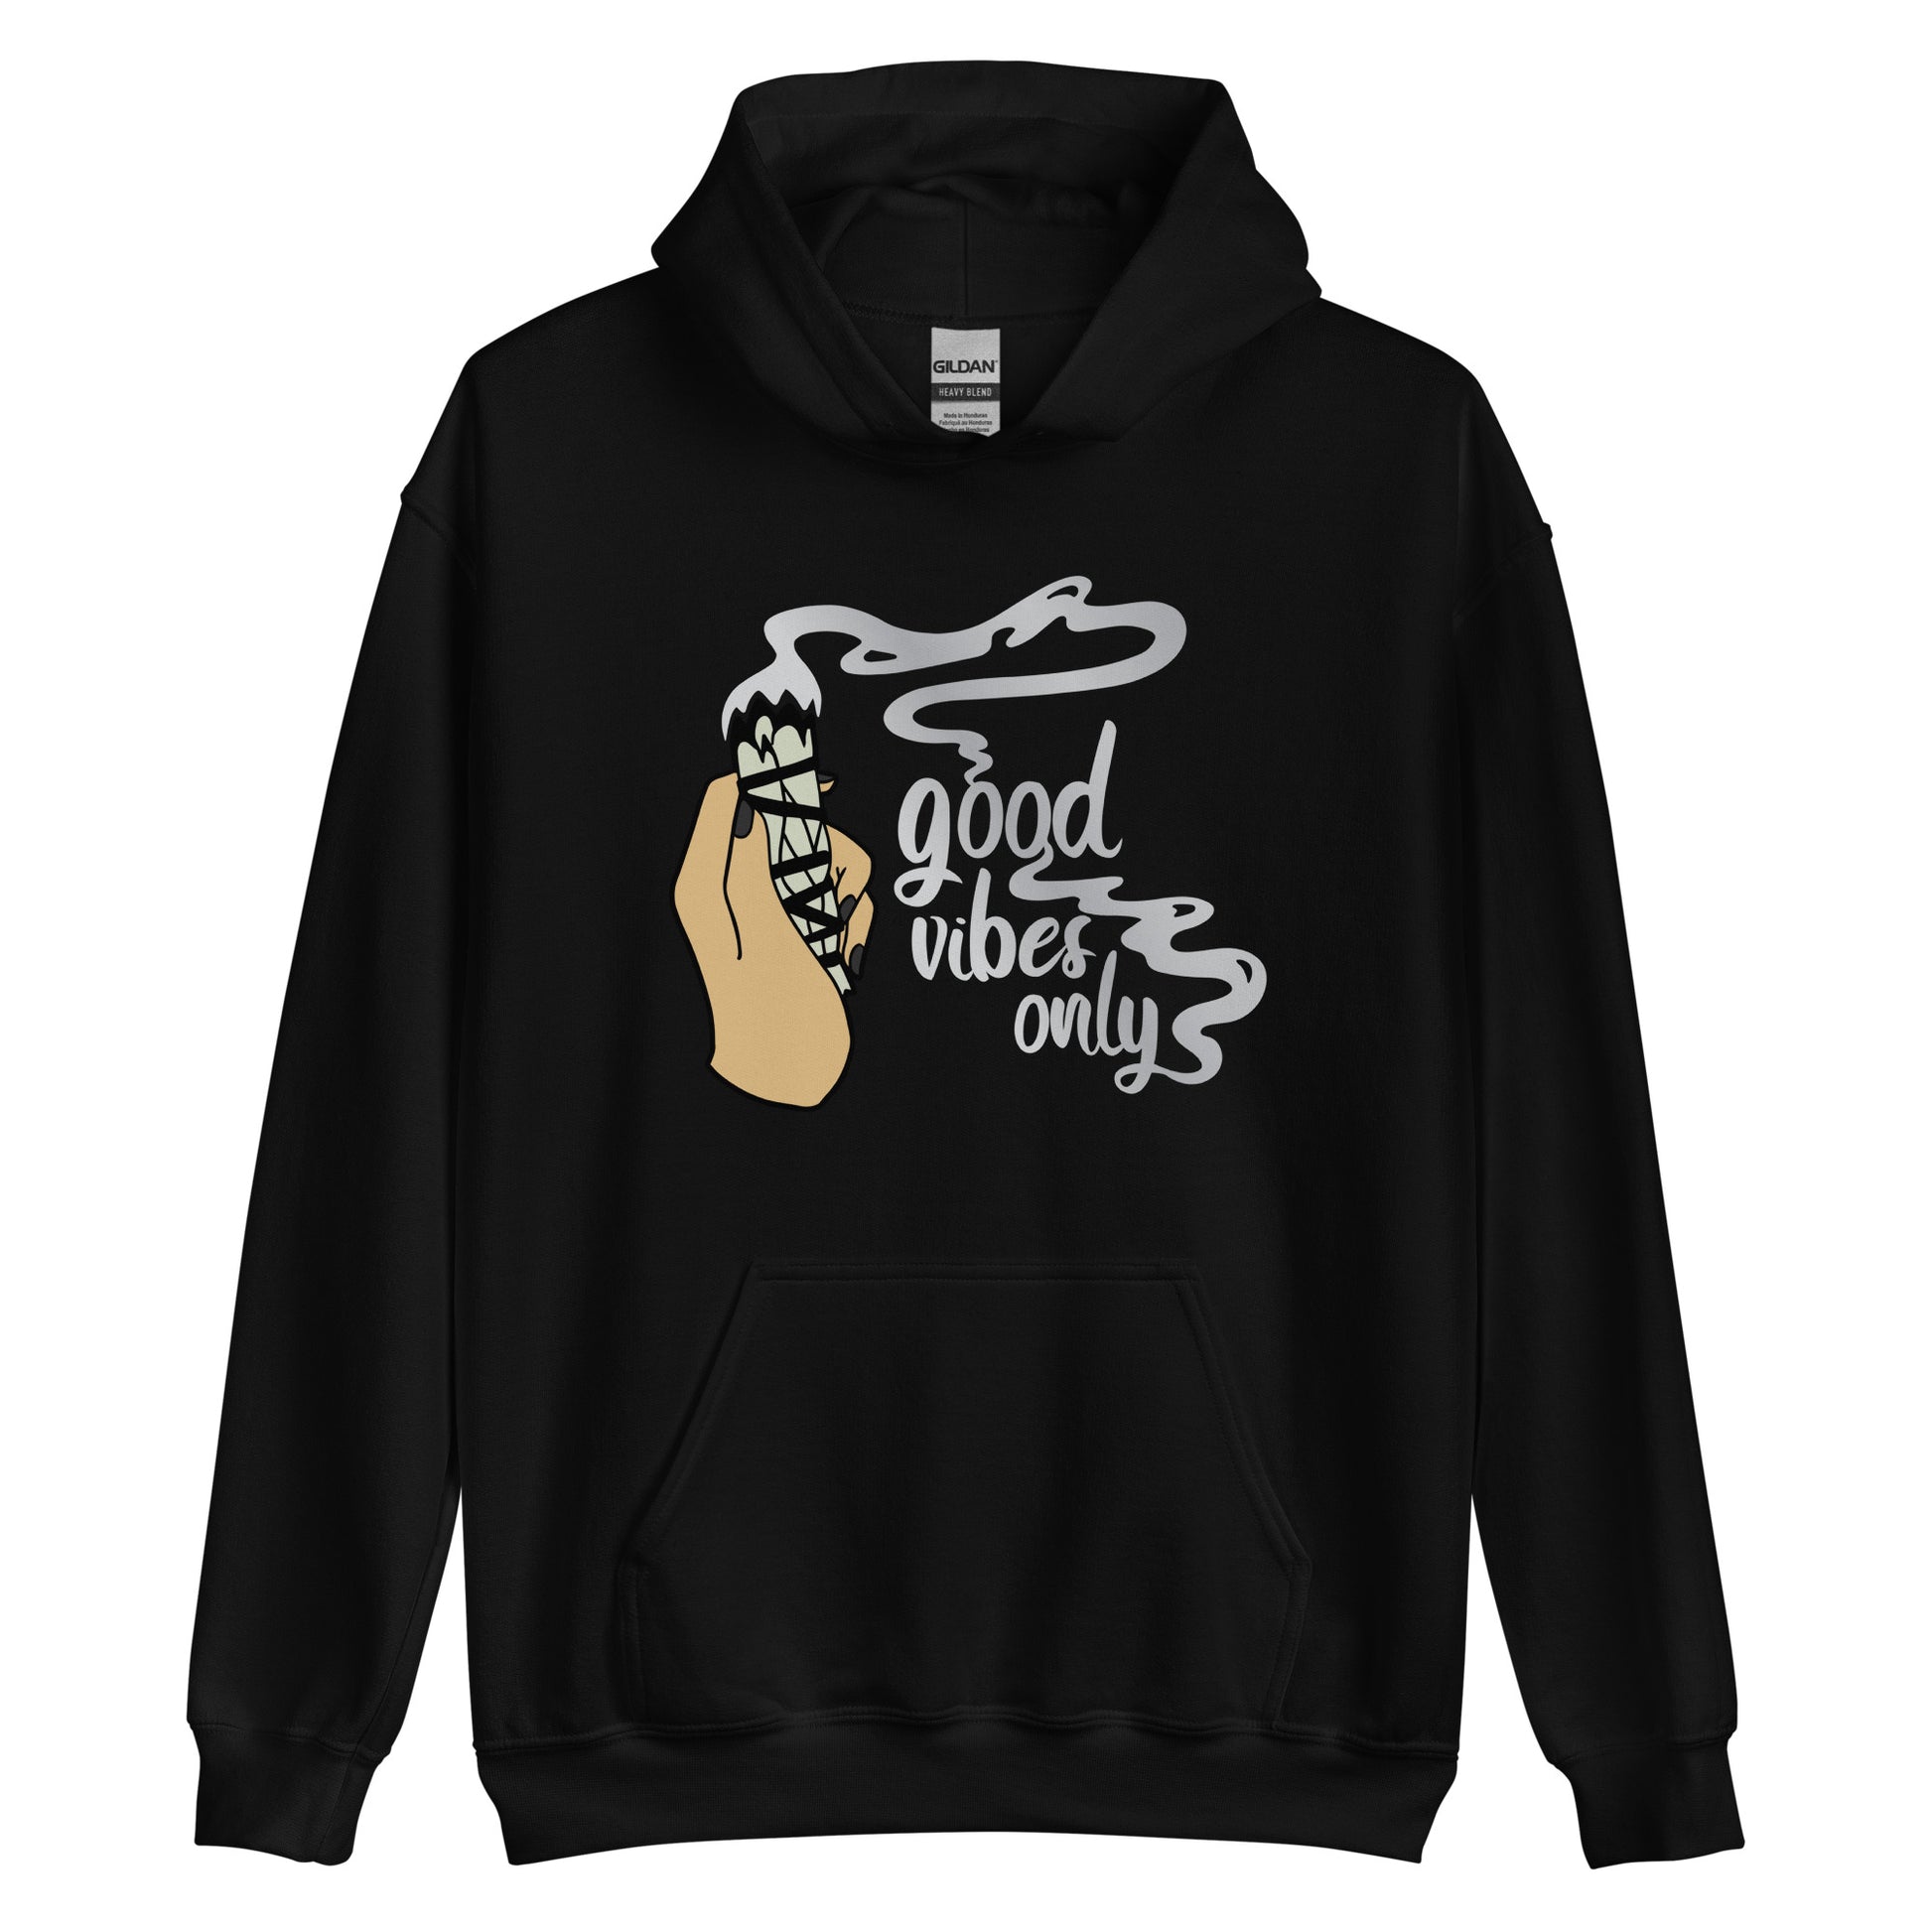 A black hooded sweatshirt with graphic of a hand holding sage smudge stick and text reading "Good Vibes only"